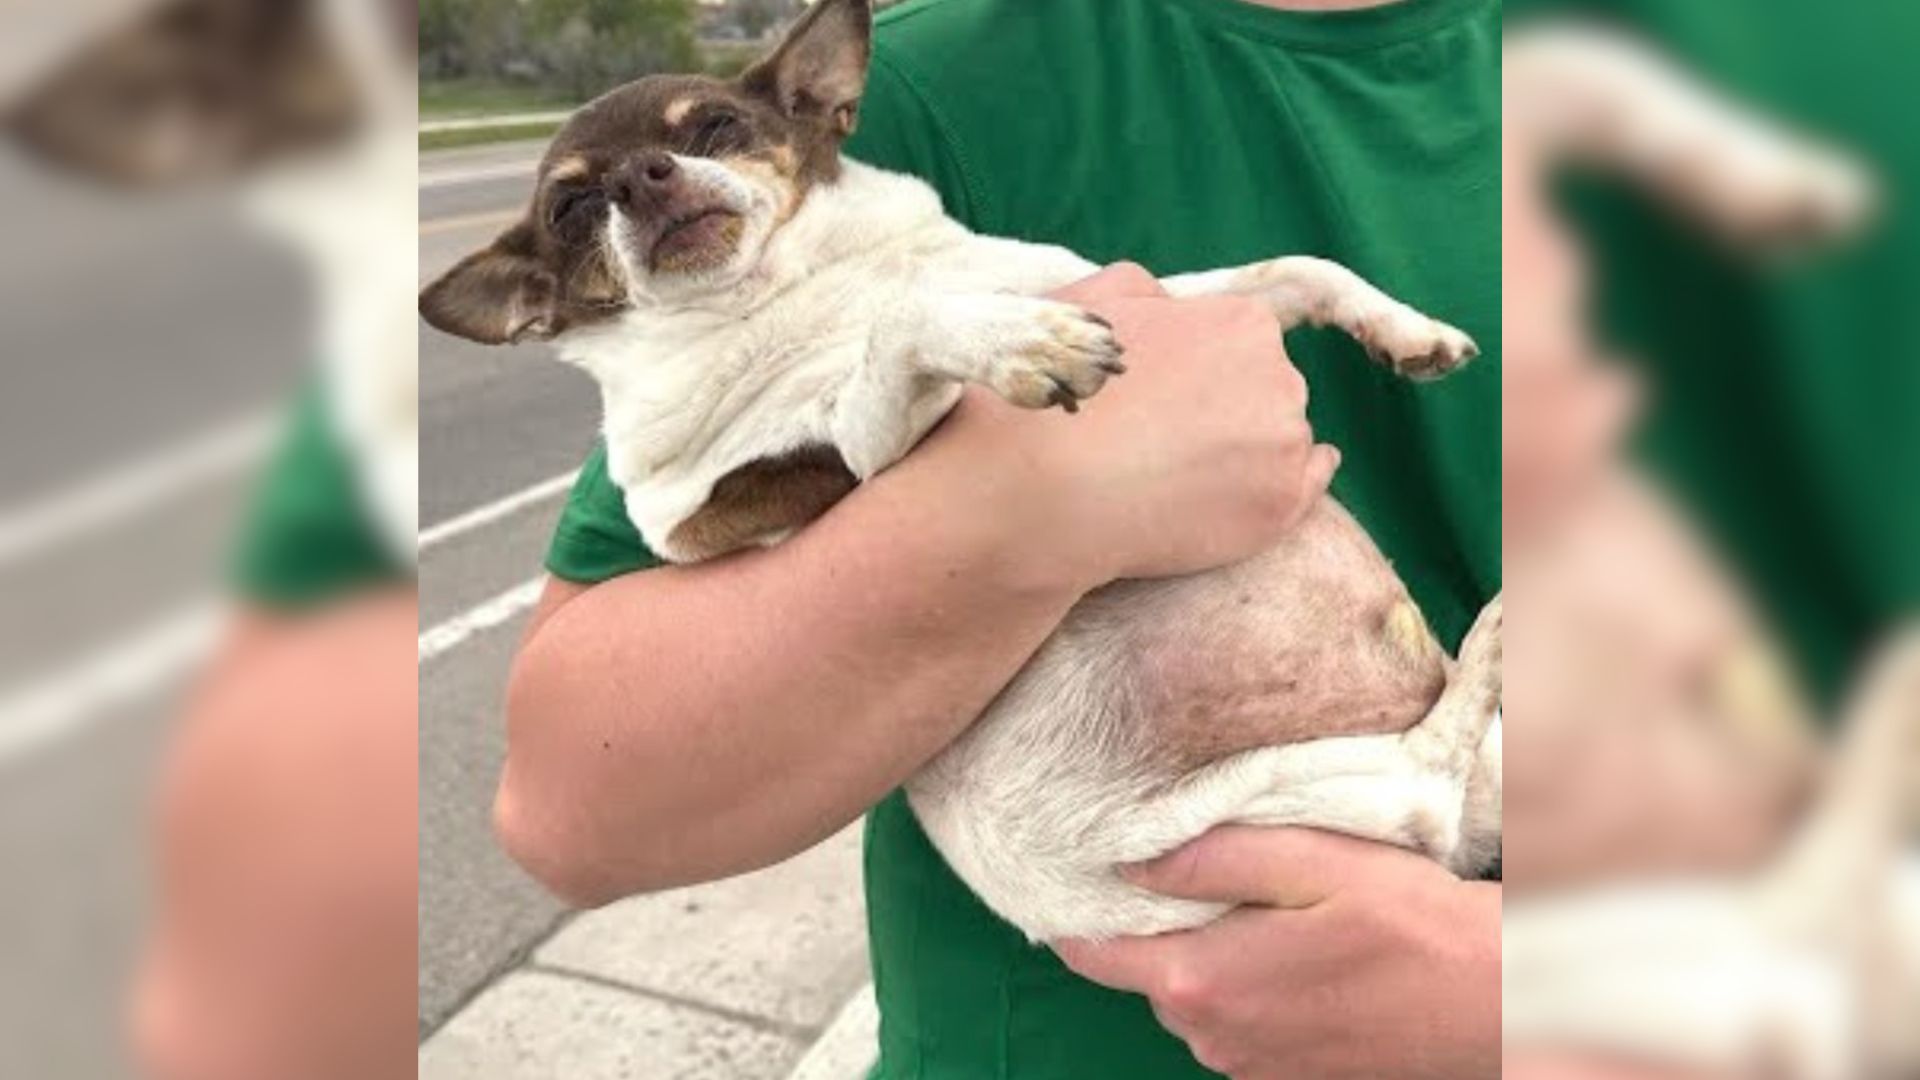 Obese Senior Chihuahua Loses More Than A Third Of His Body Weight On His Transformative Journey